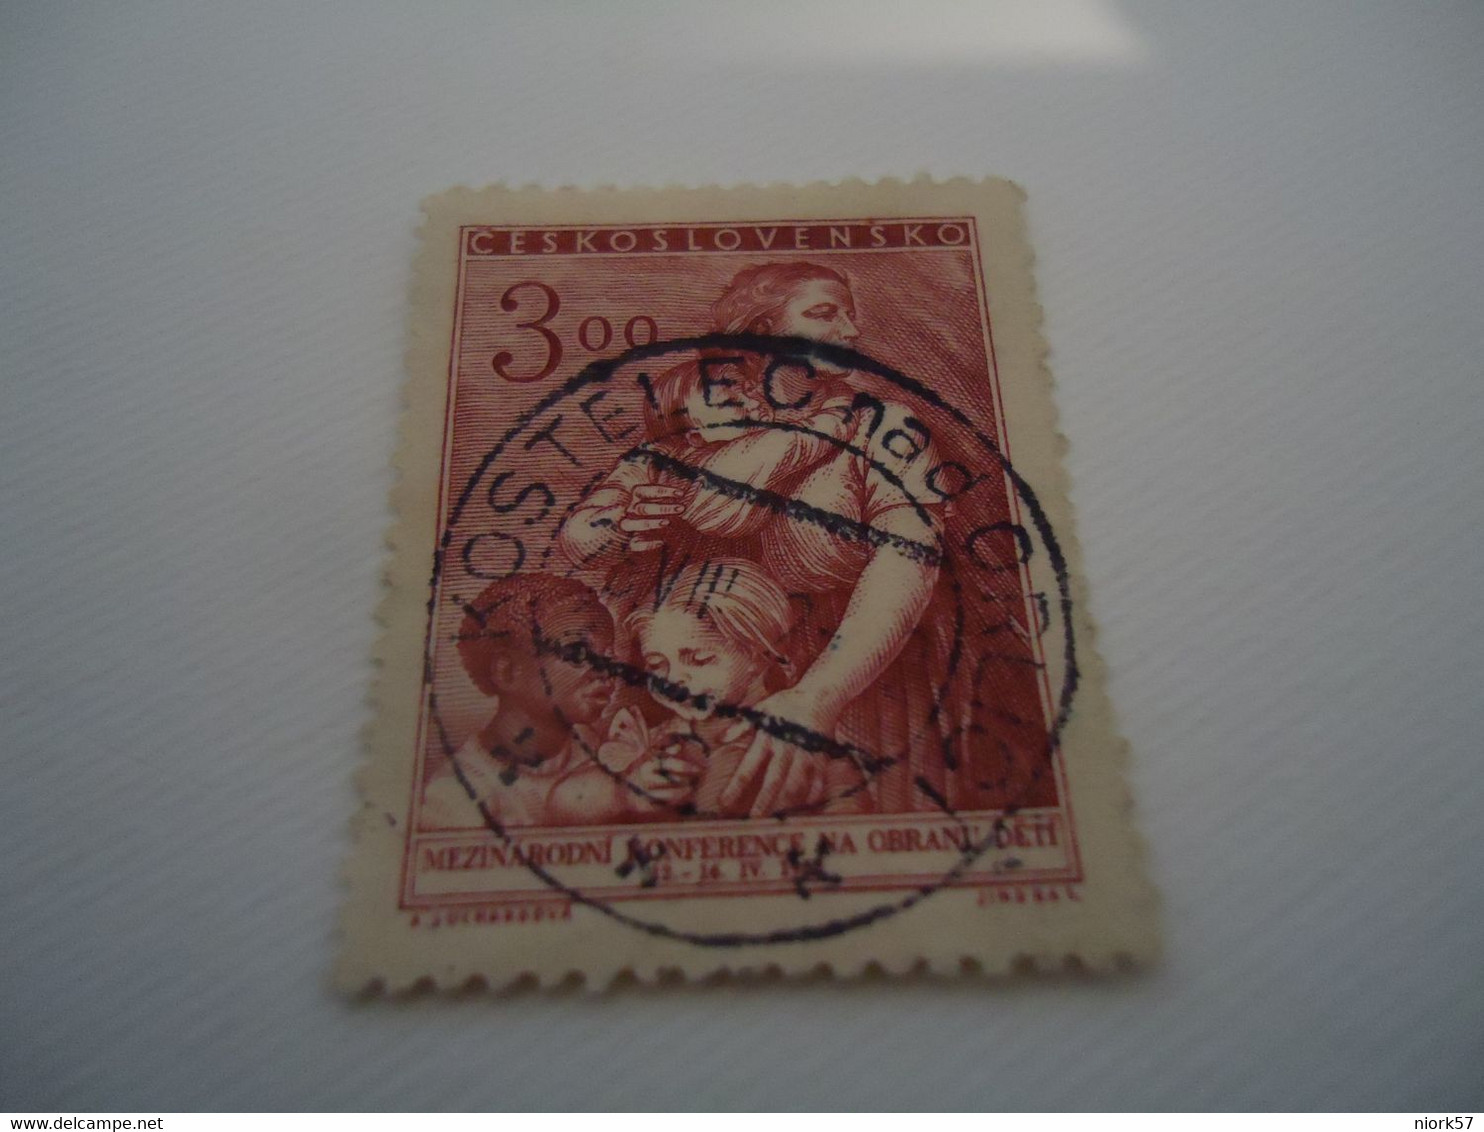 CZECHOSLOVAKIA USED STAMPS   WITH POSTMARK  KOSTELEC - Occ. Yougoslave: Fiume